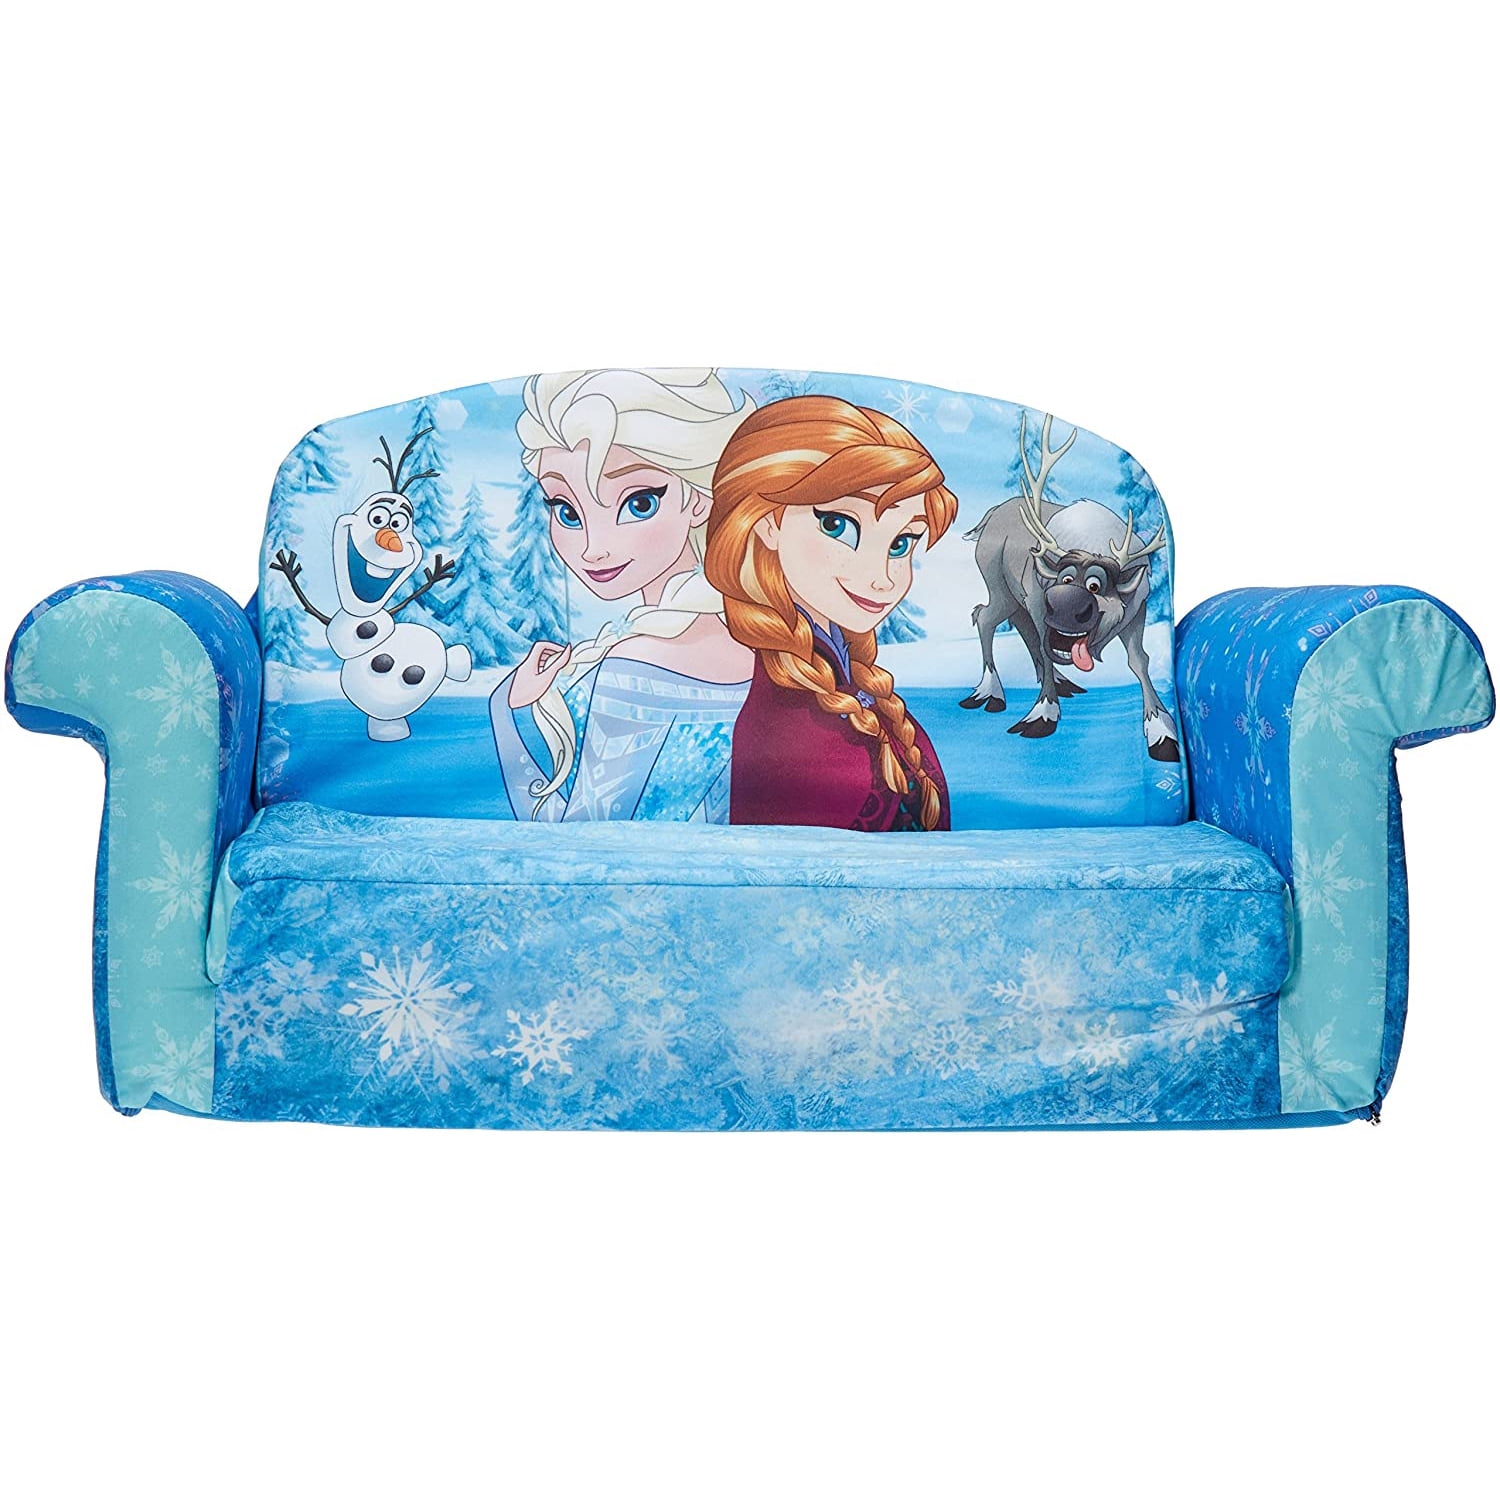 Used Disney's Frozen 2 Marshmallow Furniture 2-in-1 Flip Open Couch Bed 